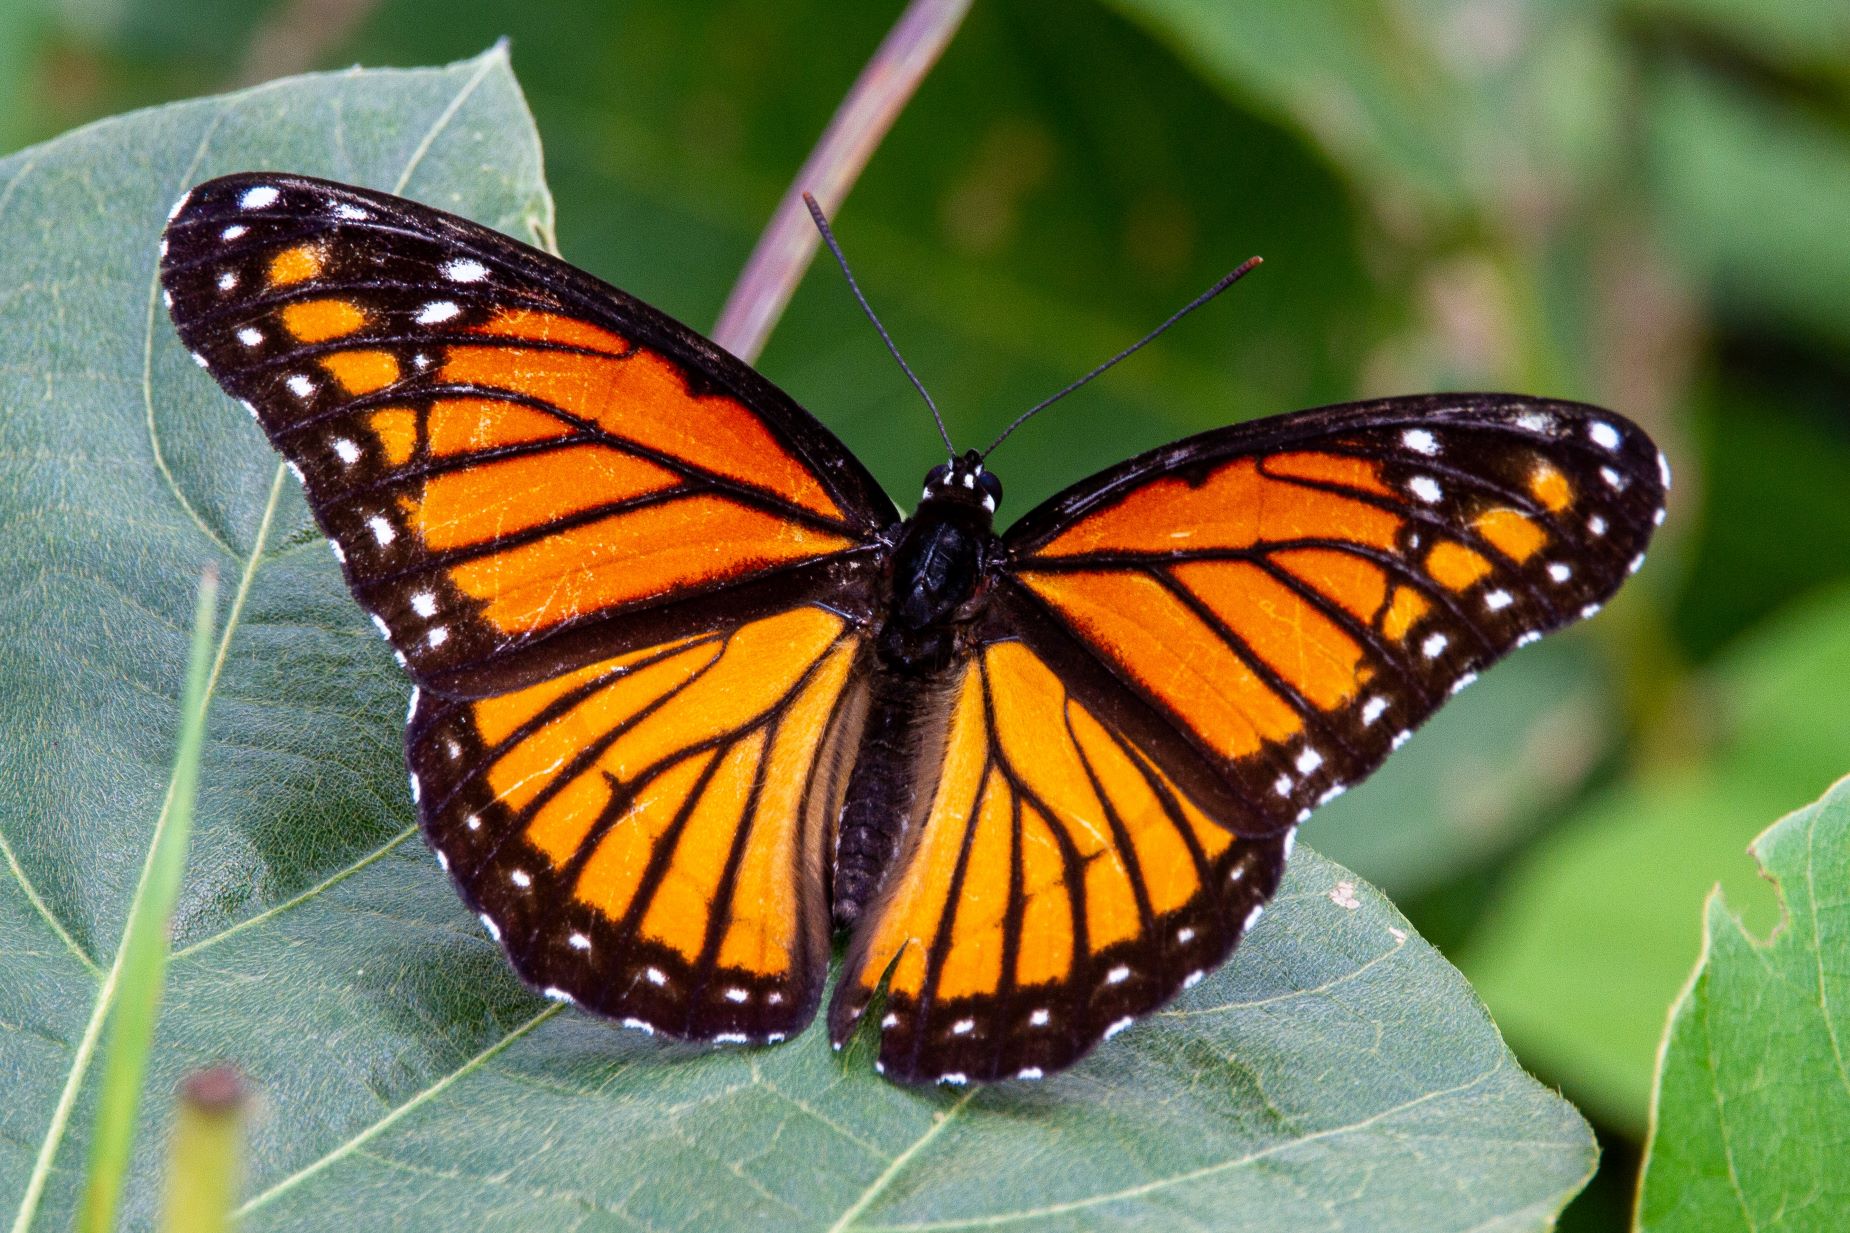 An image of a monarch butterfly.